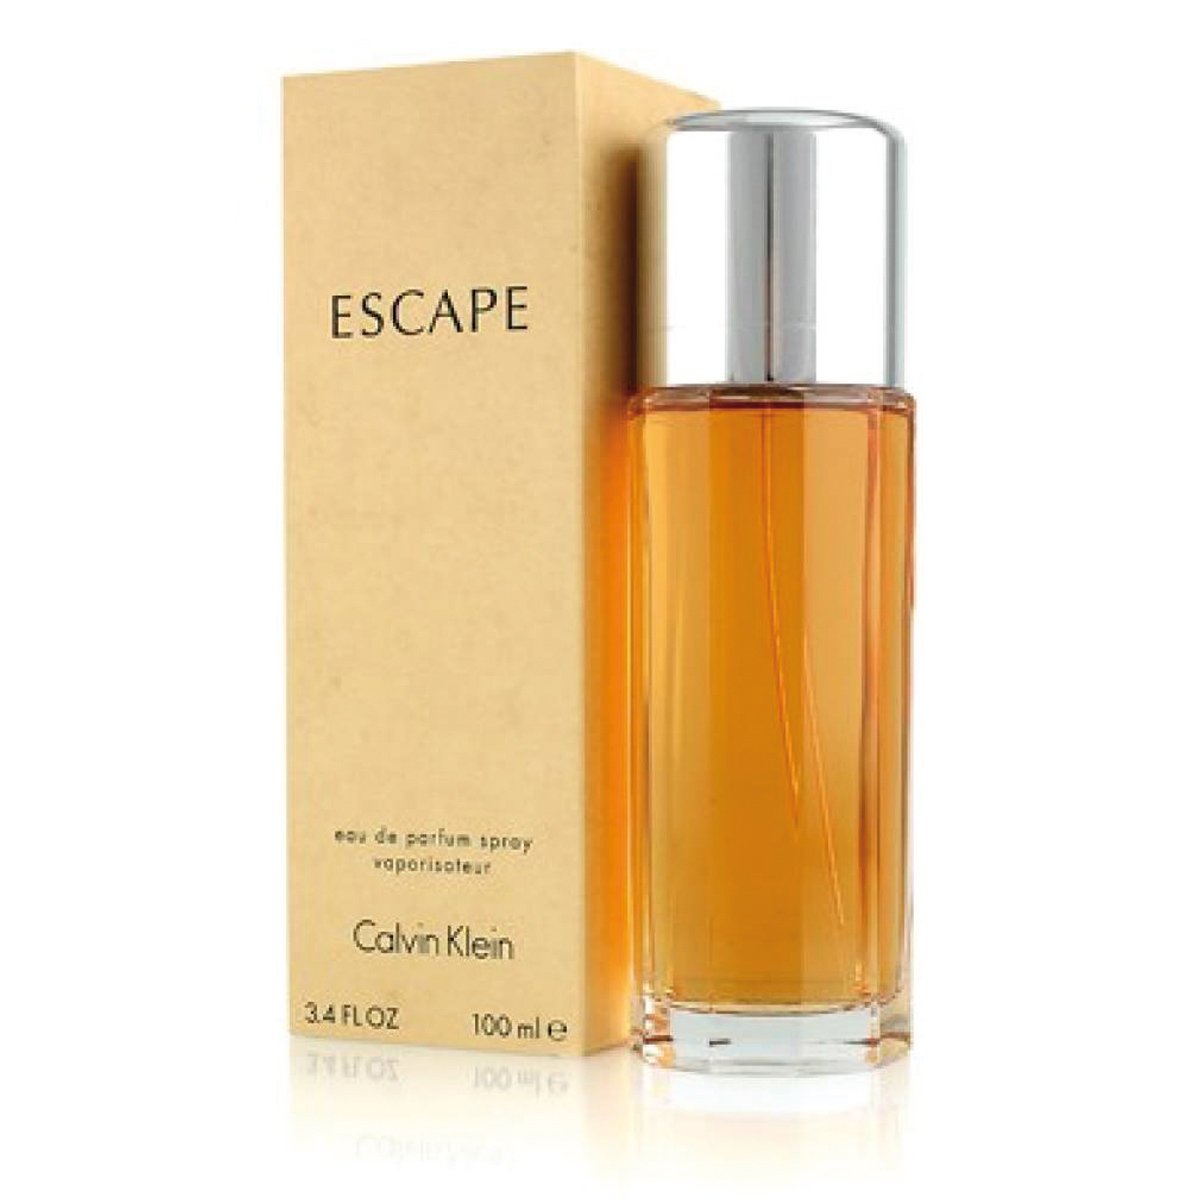 Escape for her by Calvin Klein